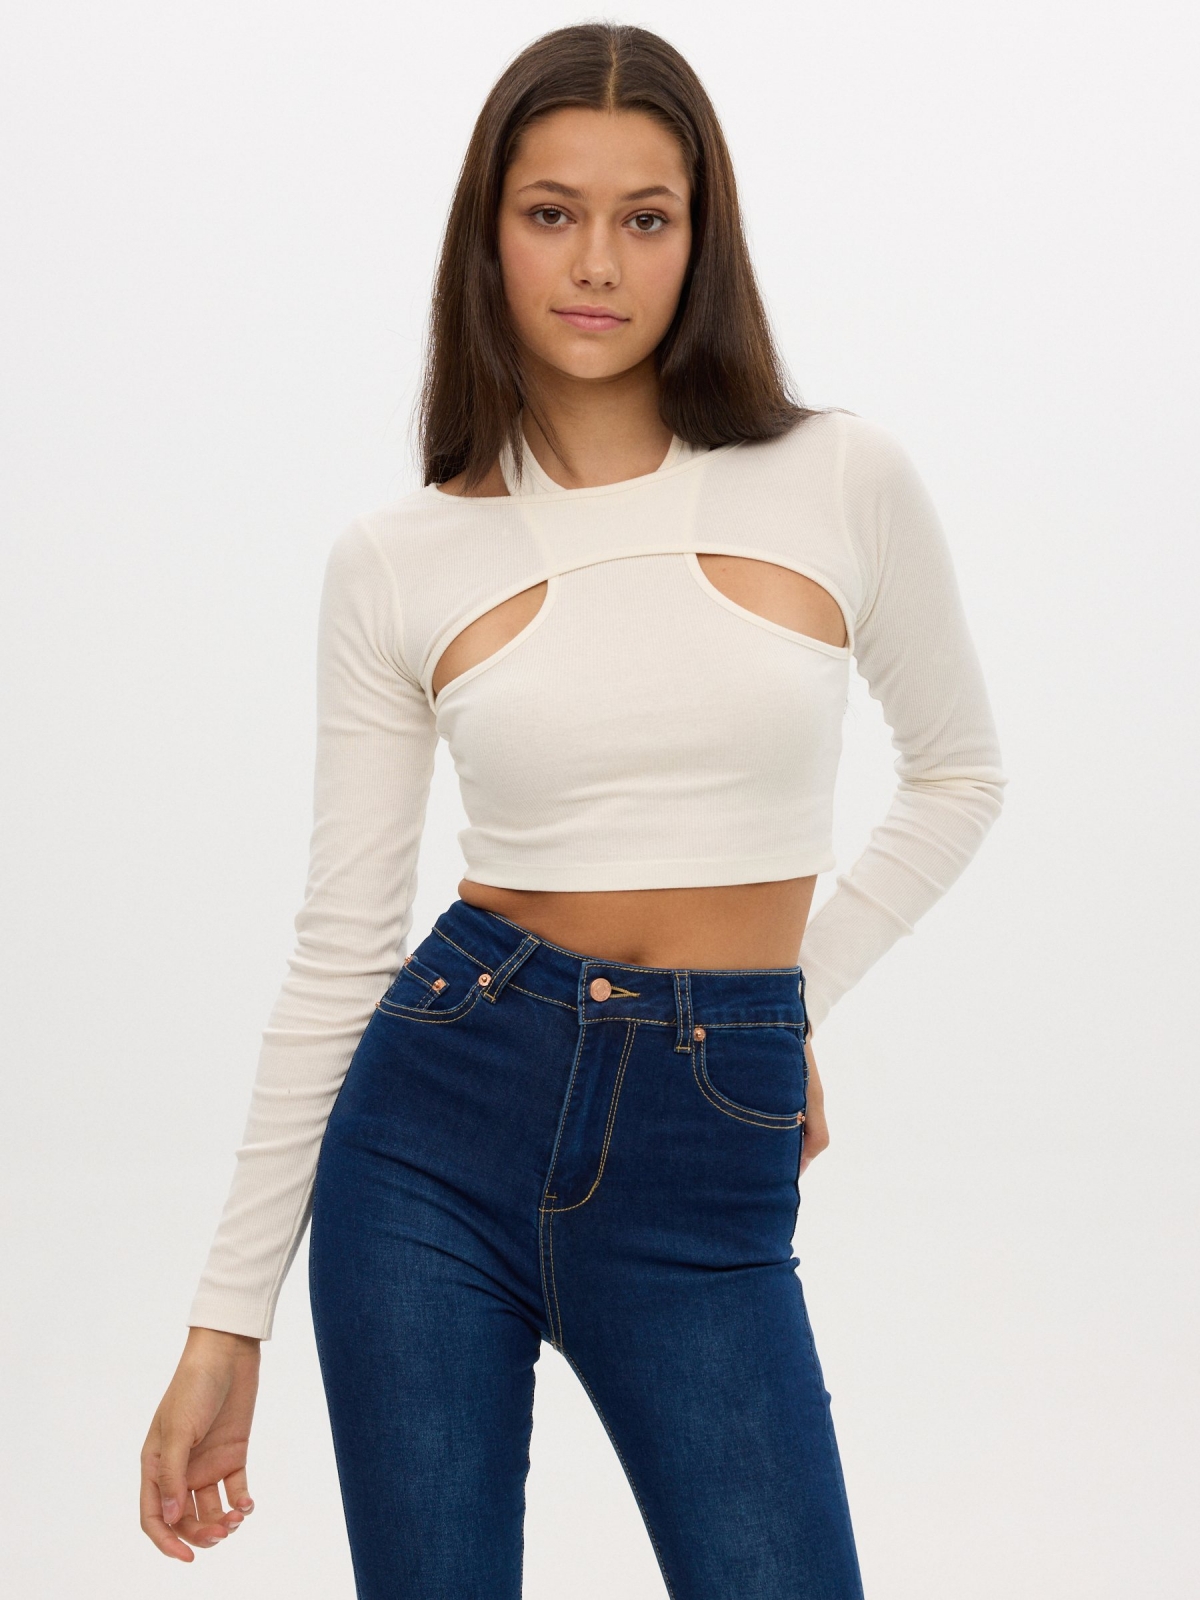 Ribbed cut out t-shirt off white middle front view